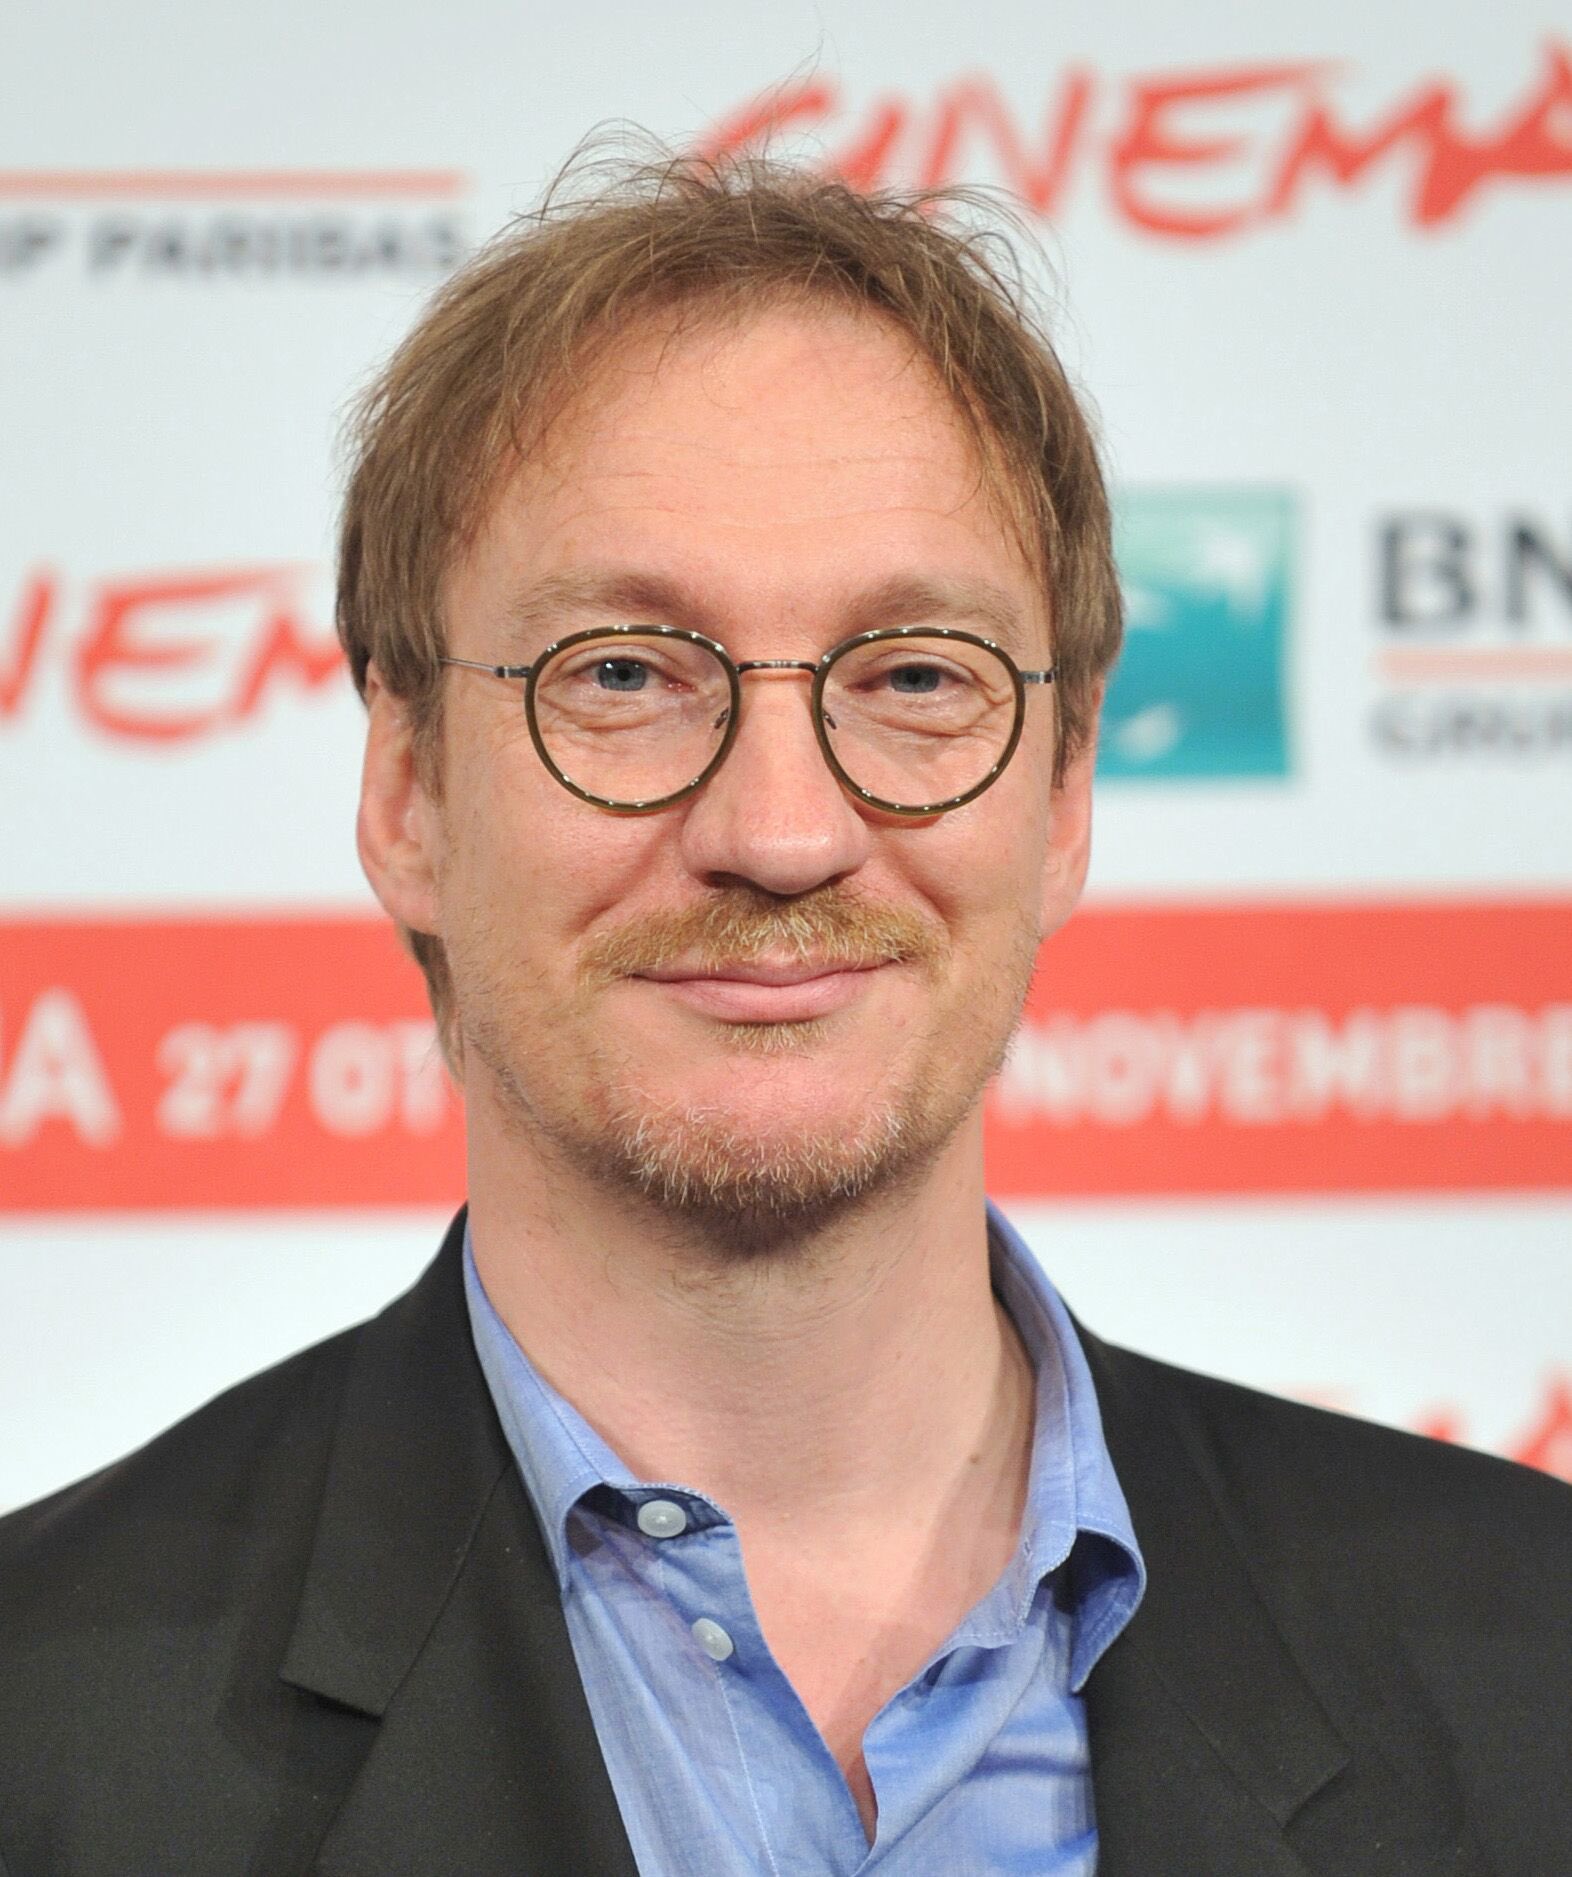  Happy birthday to David Thewlis who portrayed Remus Lupin in the films! 